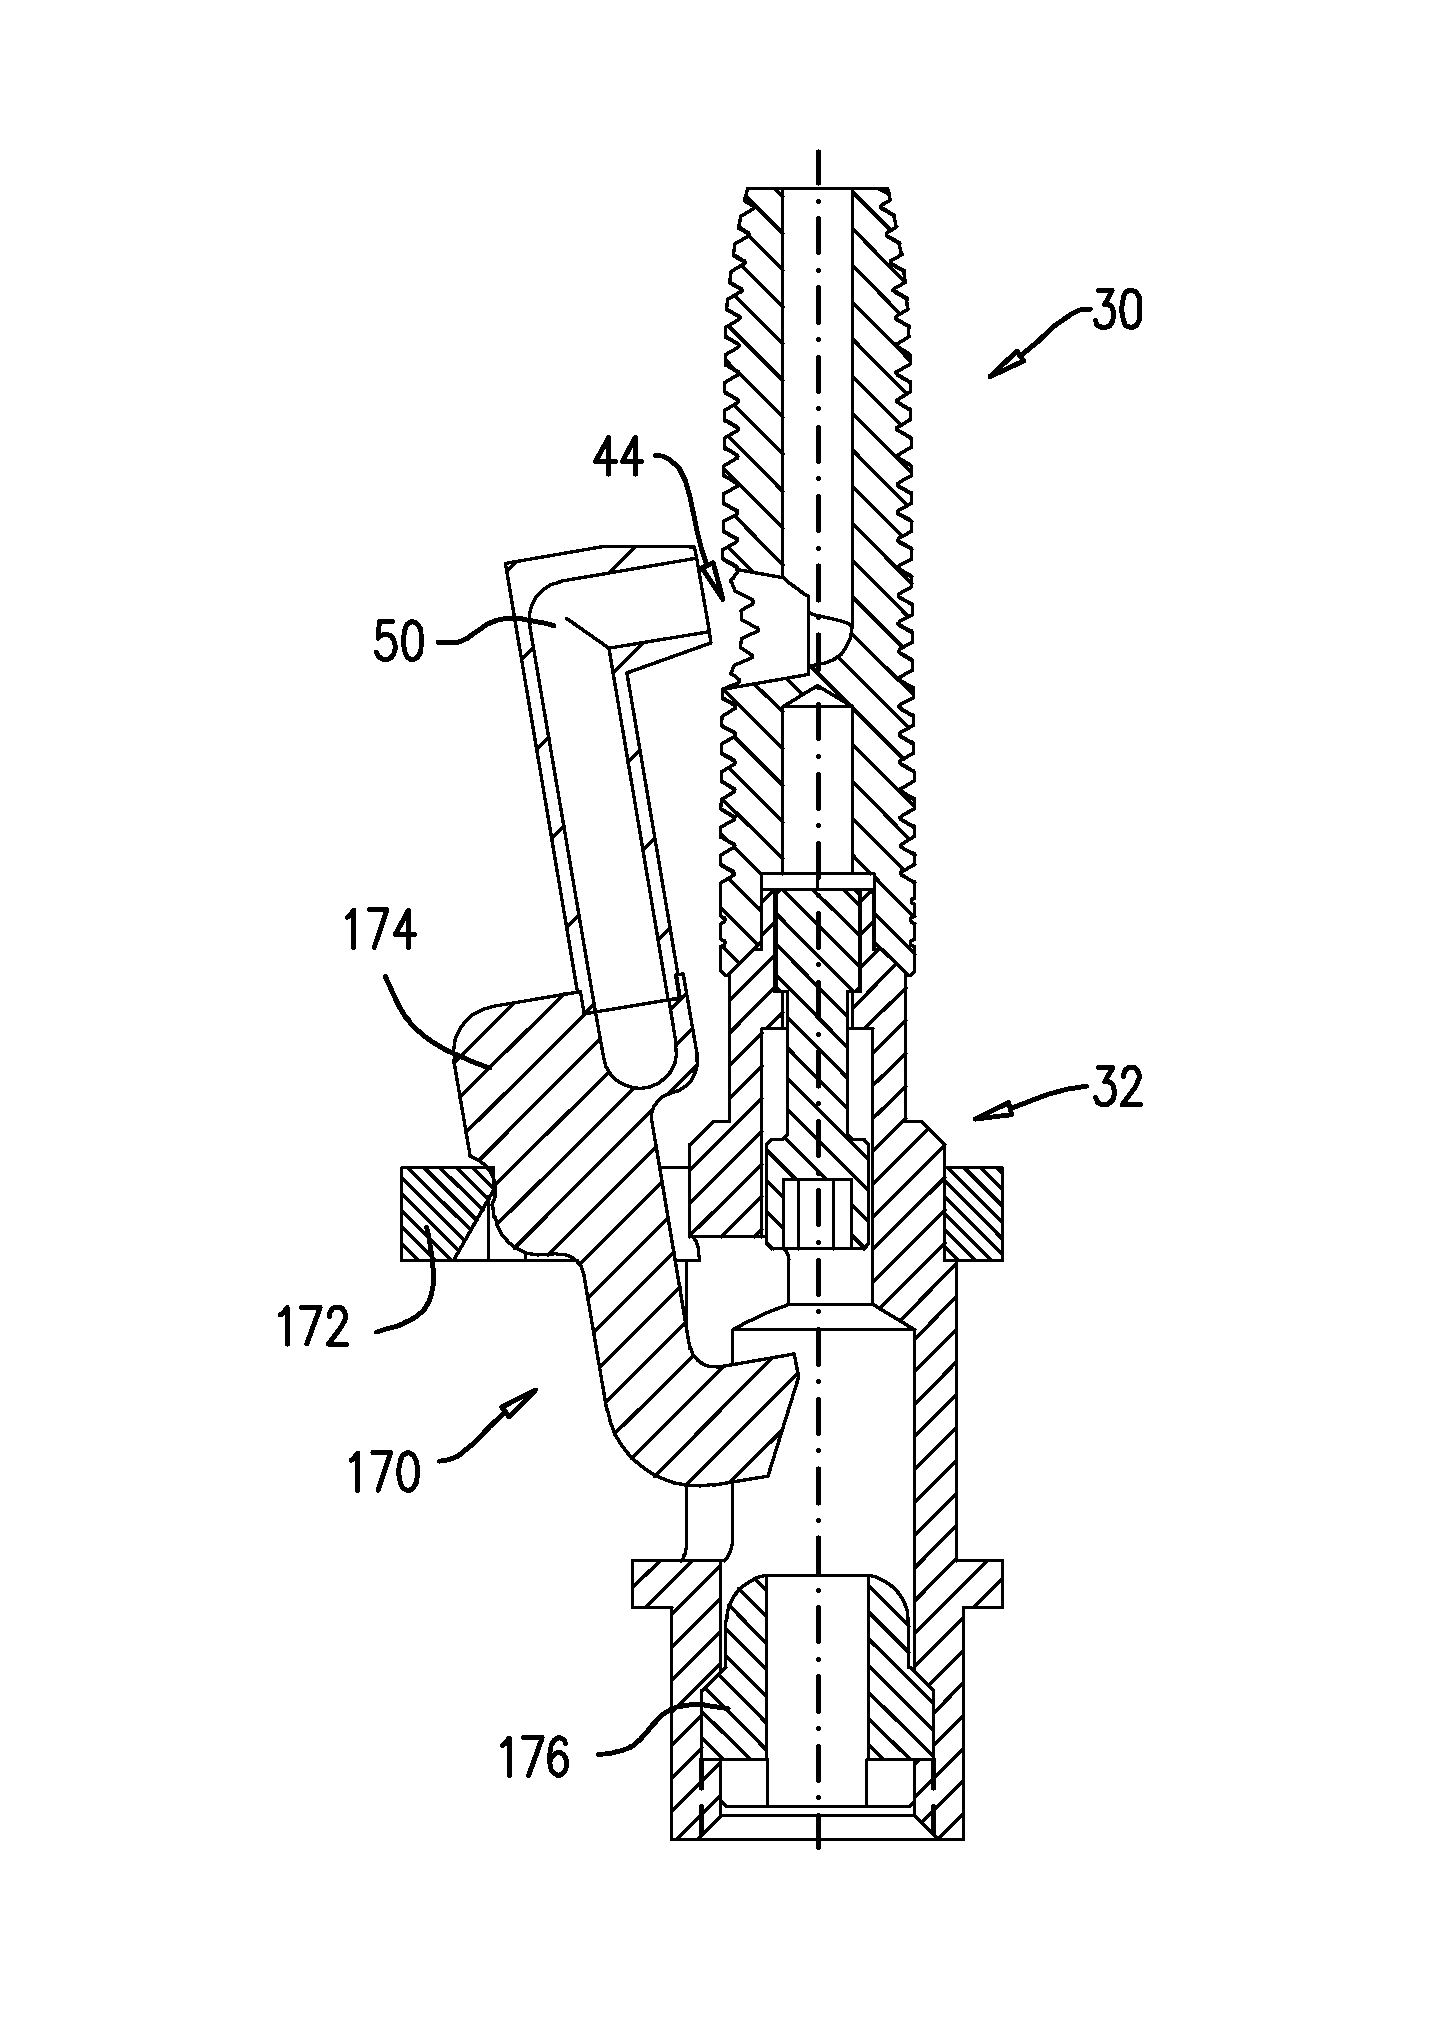 Implants, tools, and methods for sinus lift and lateral ridge augmentation